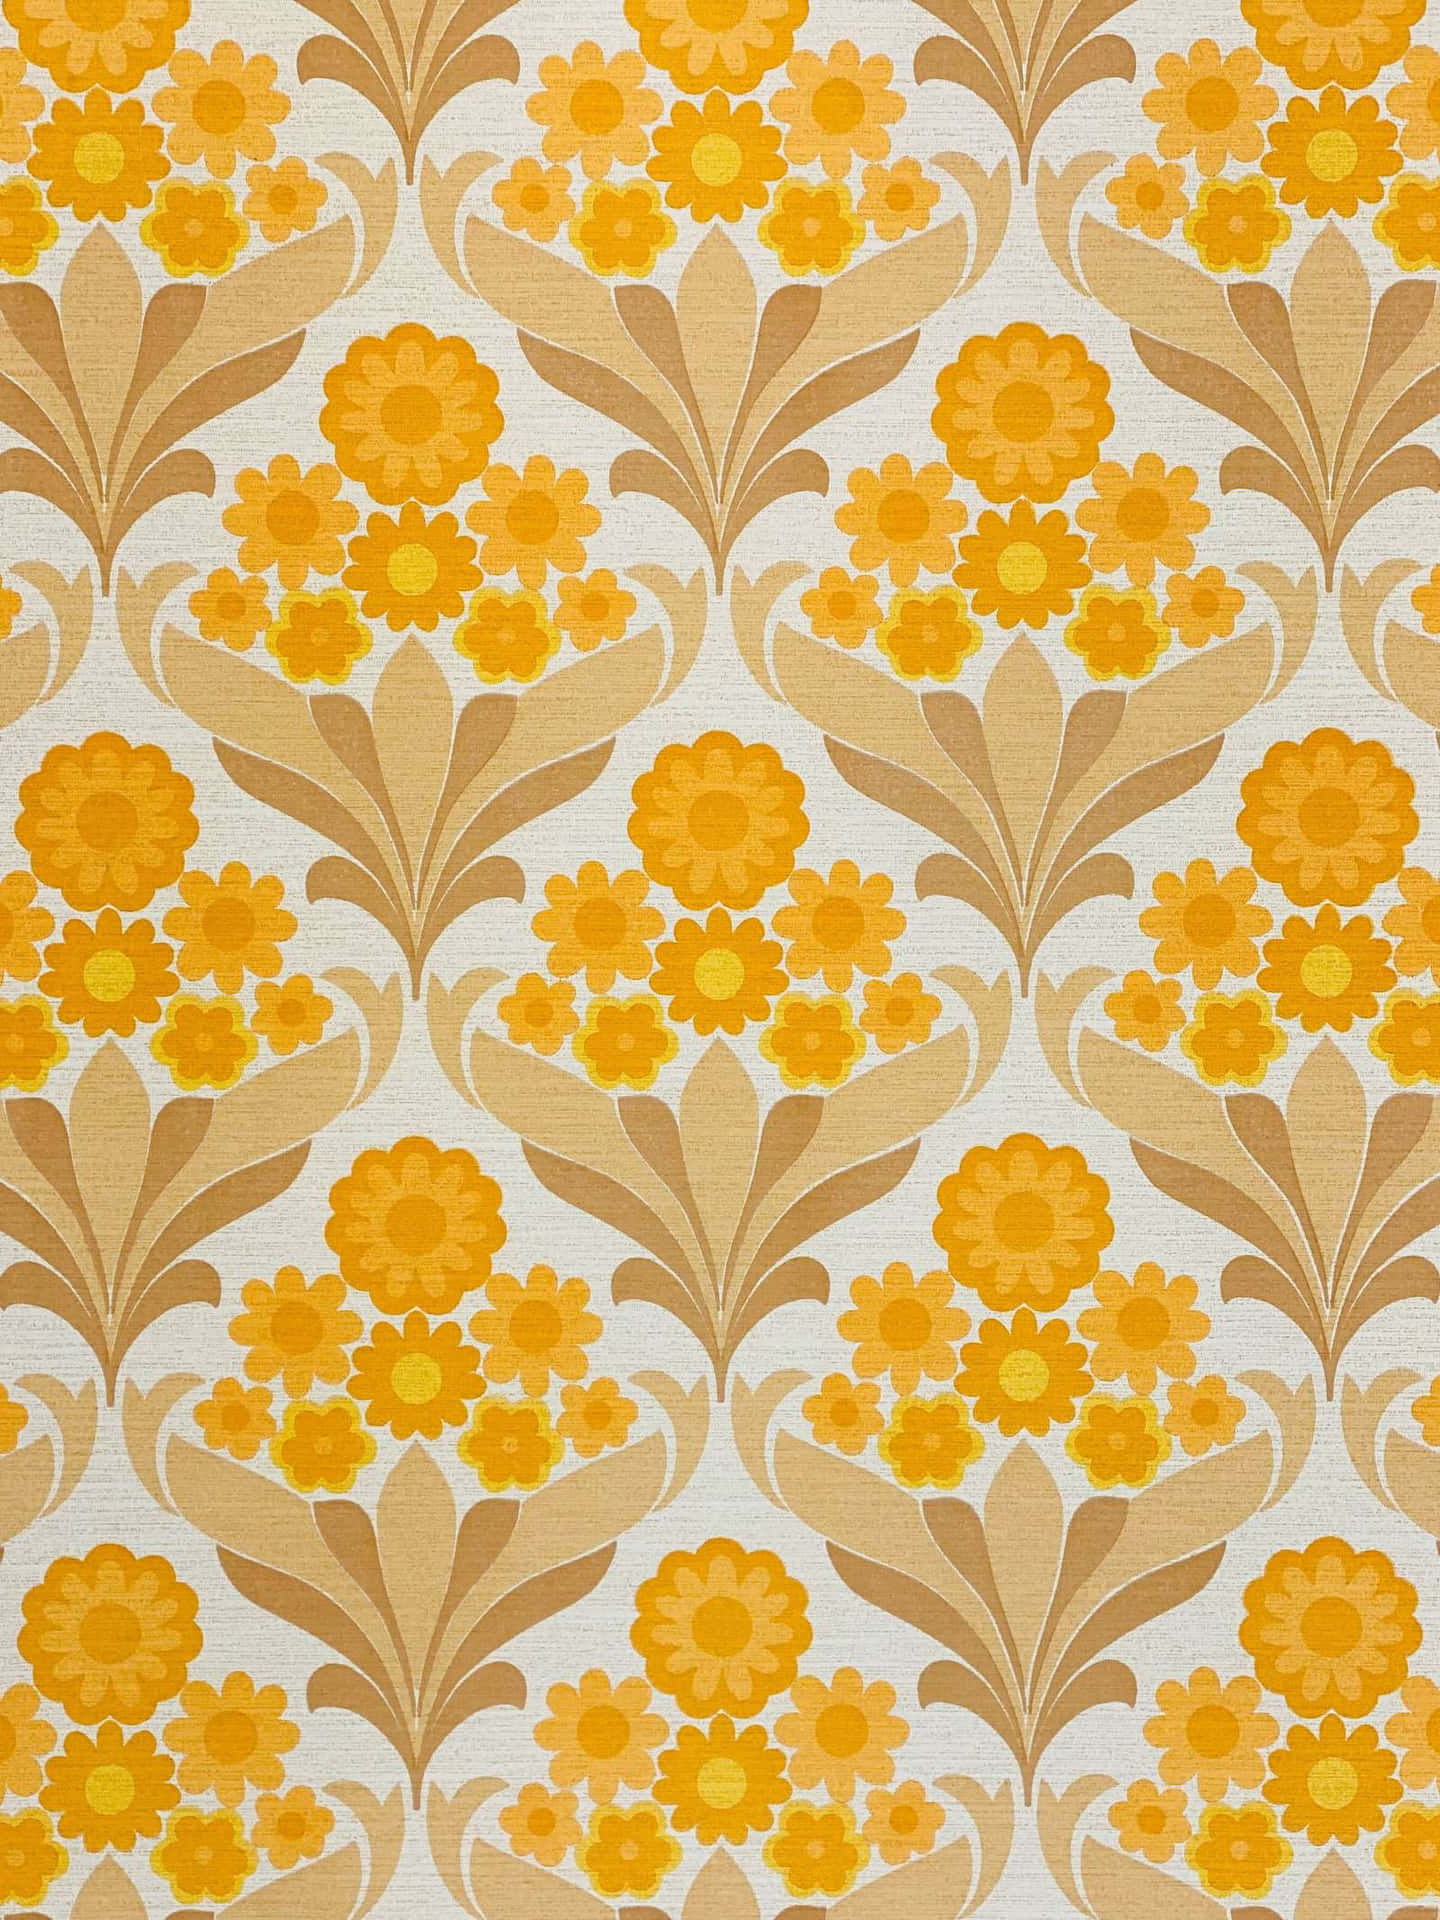 Hearts Abound in This Enchanting 70s Floral Design Wallpaper